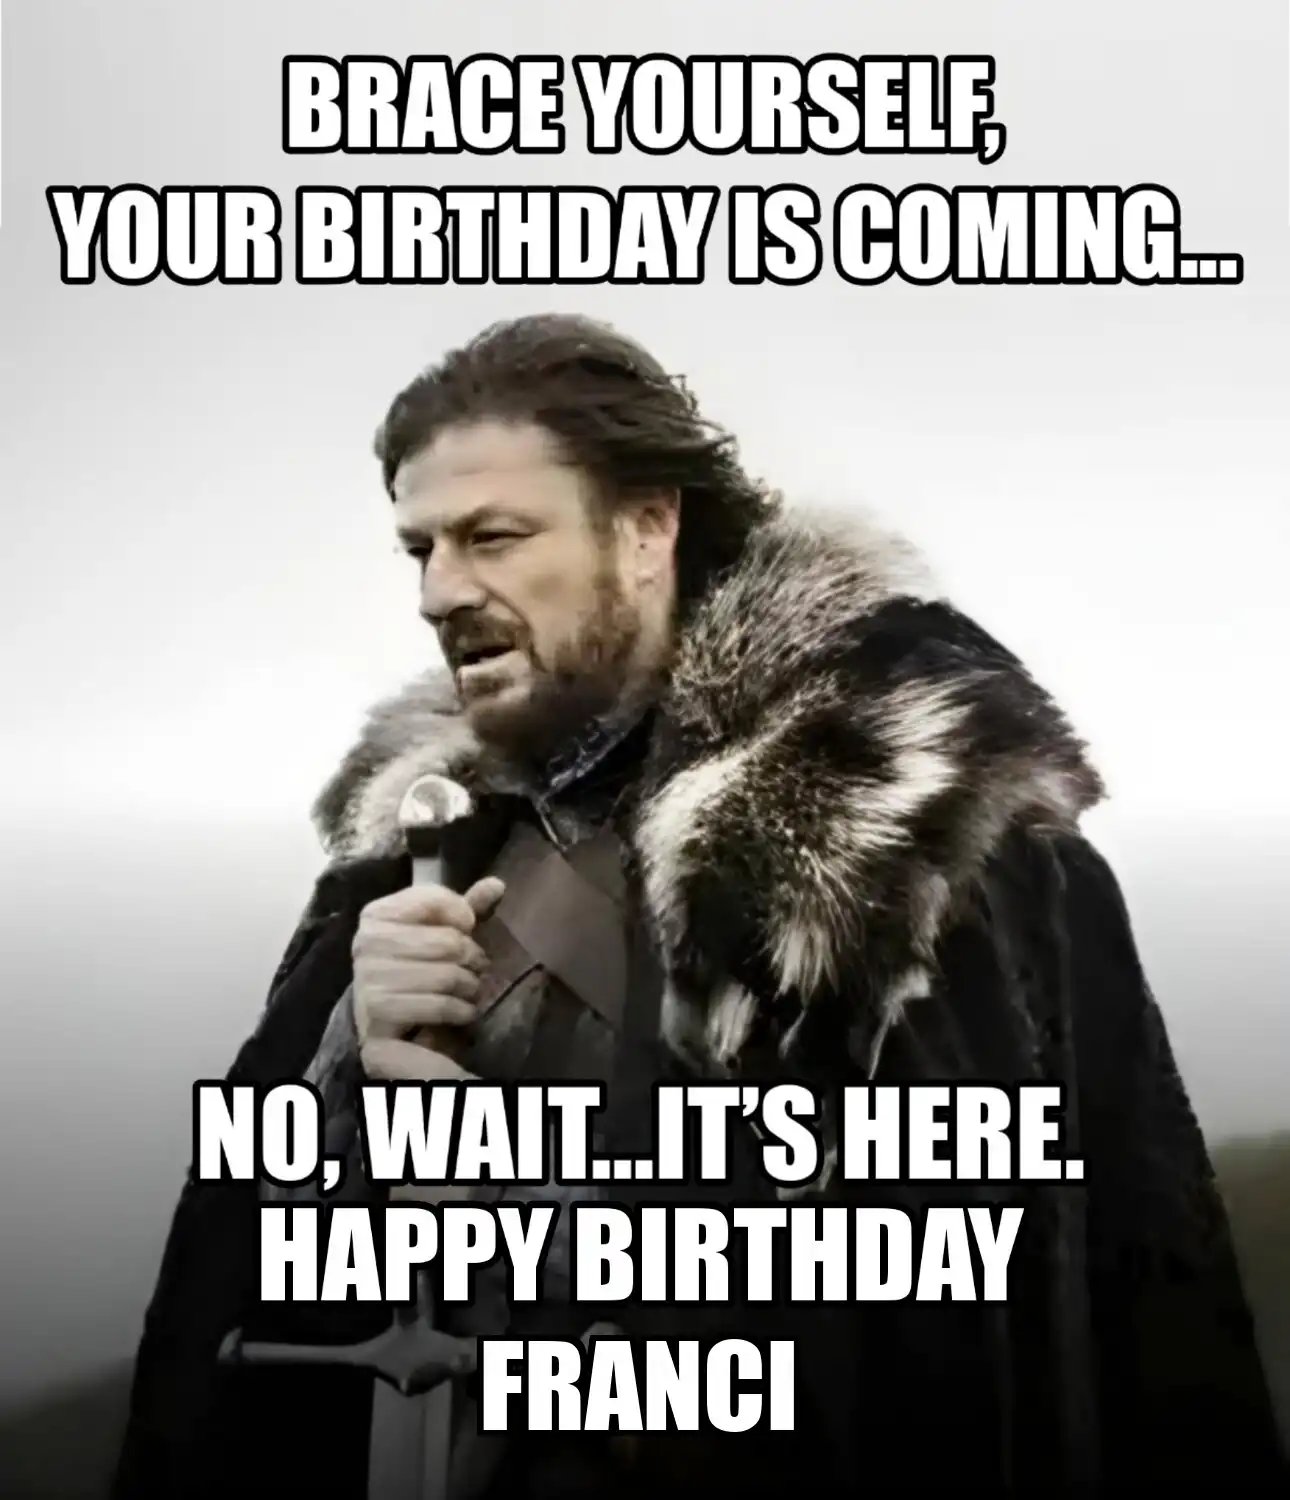 Happy Birthday Franci Brace Yourself Your Birthday Is Coming Meme